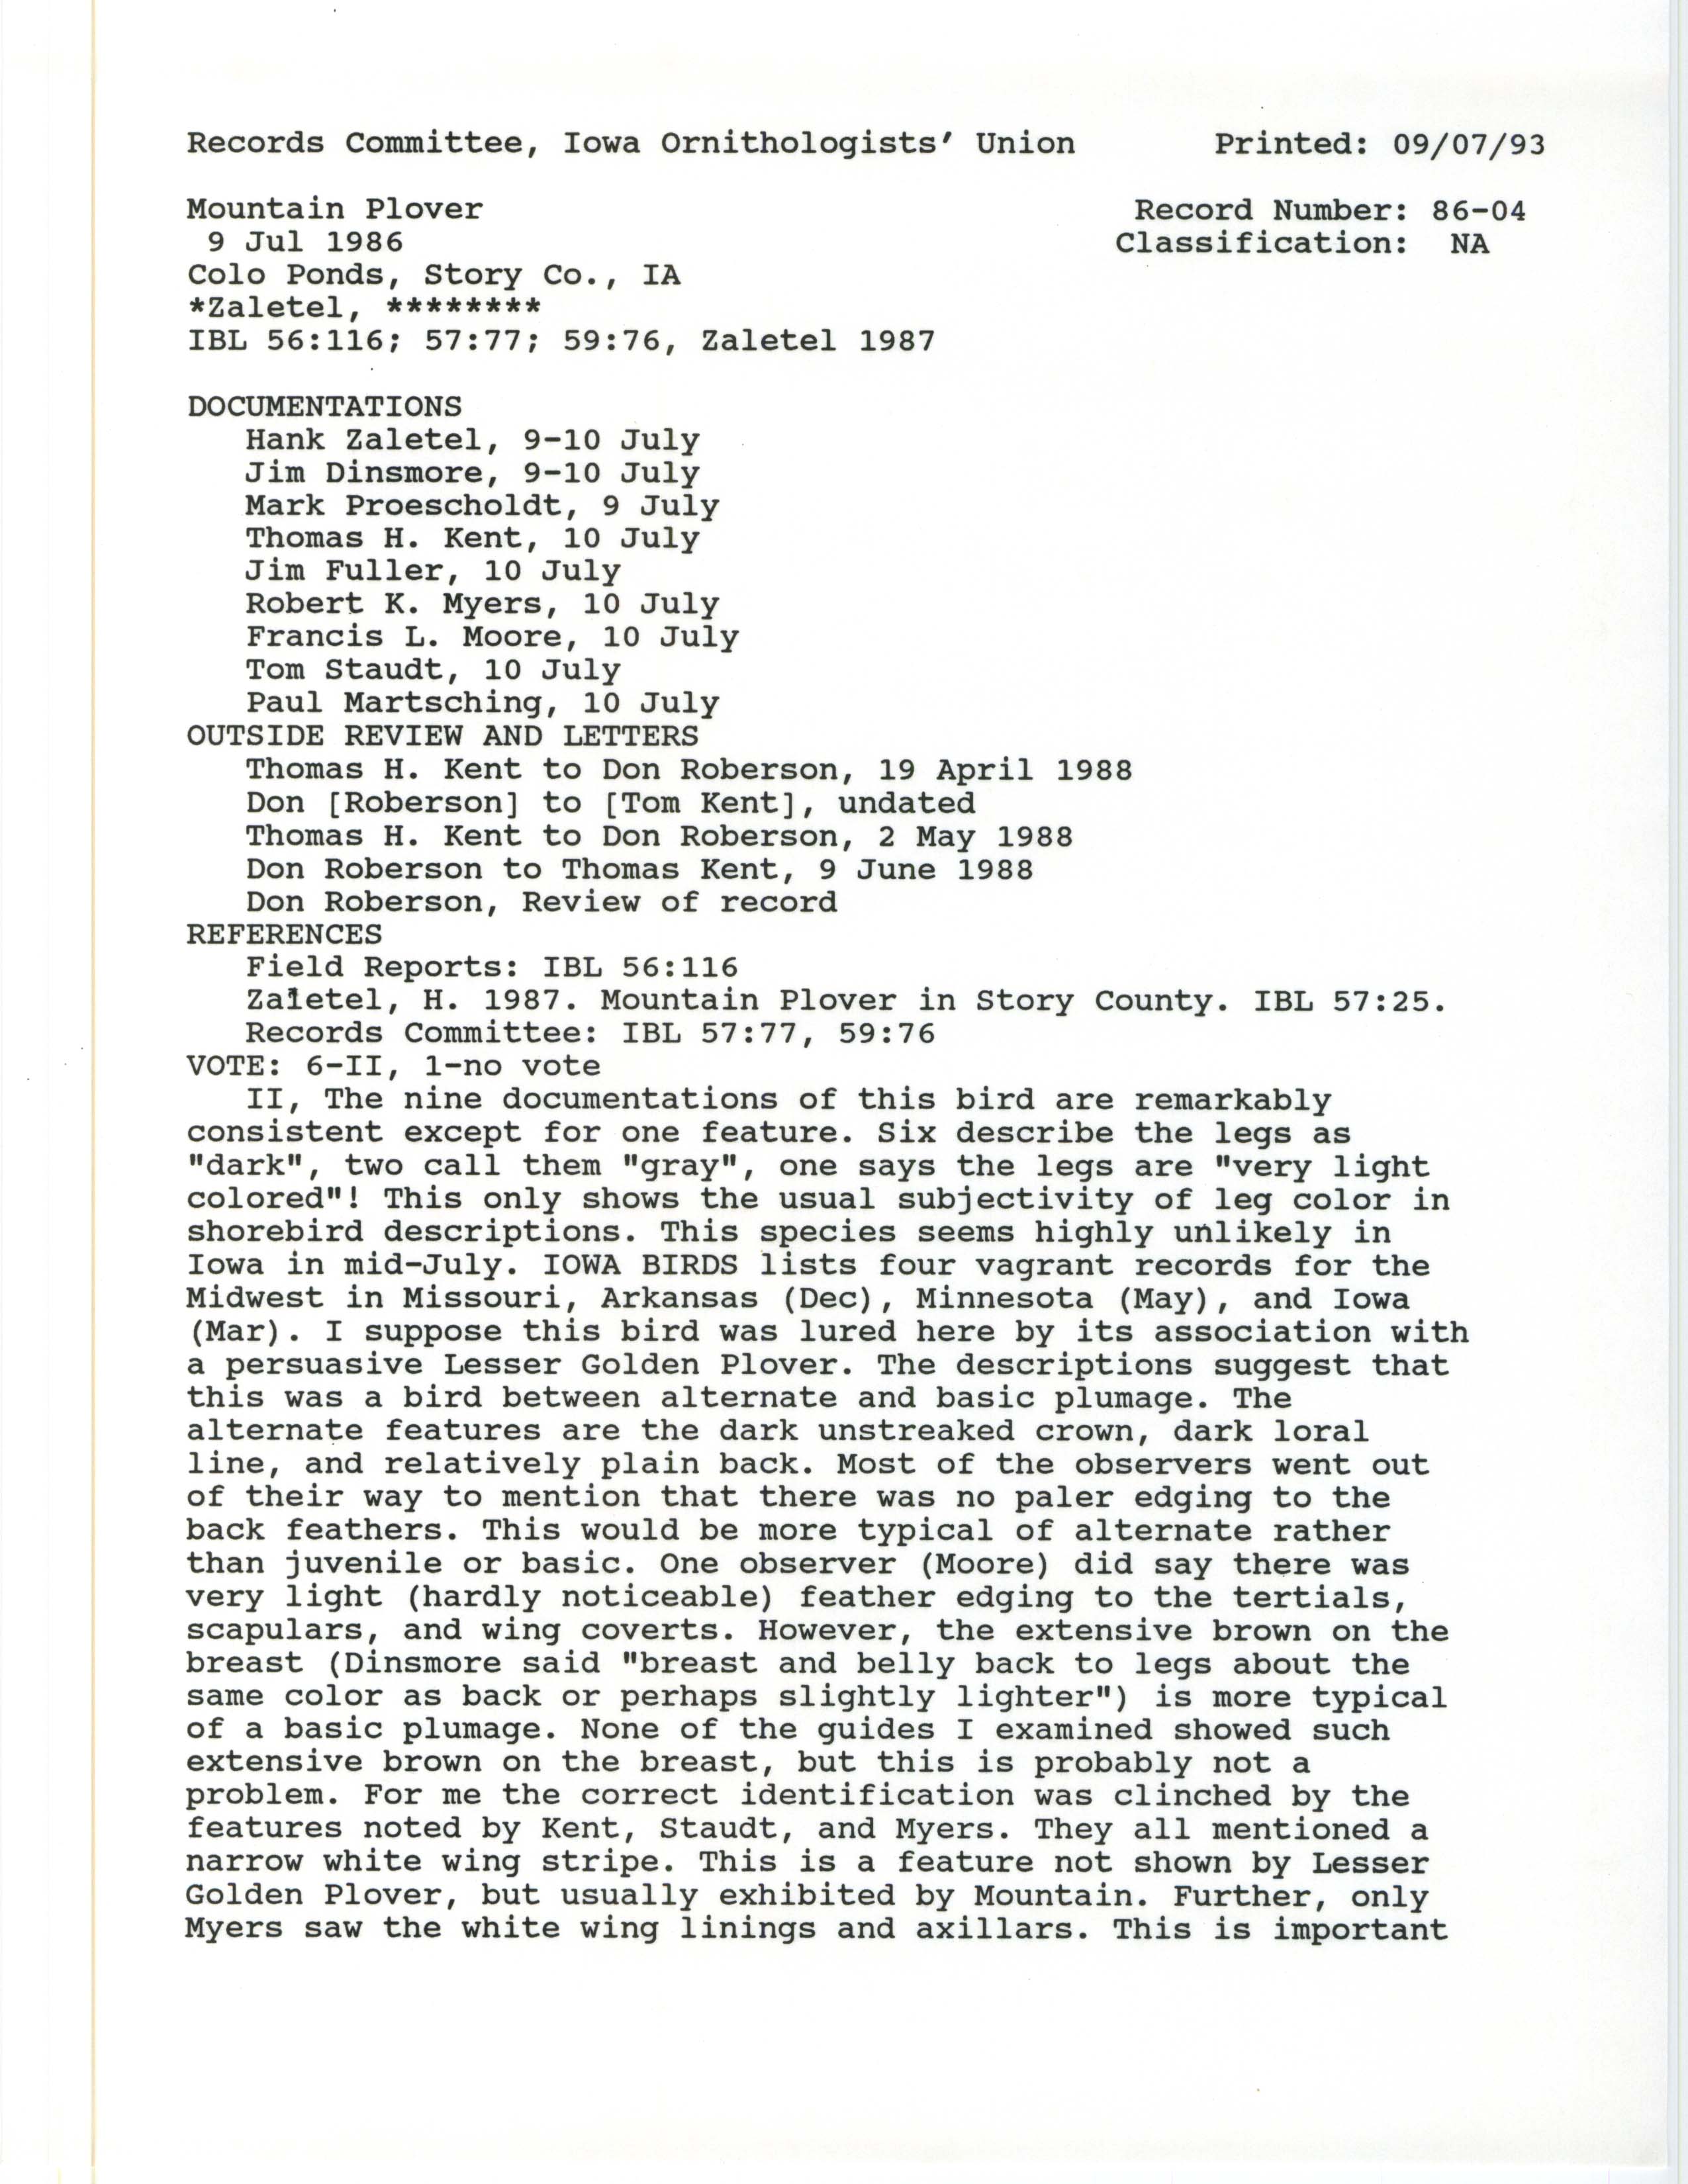 Records Committee review for rare bird sighting of Mountain Plover at Colo Ponds, 1986